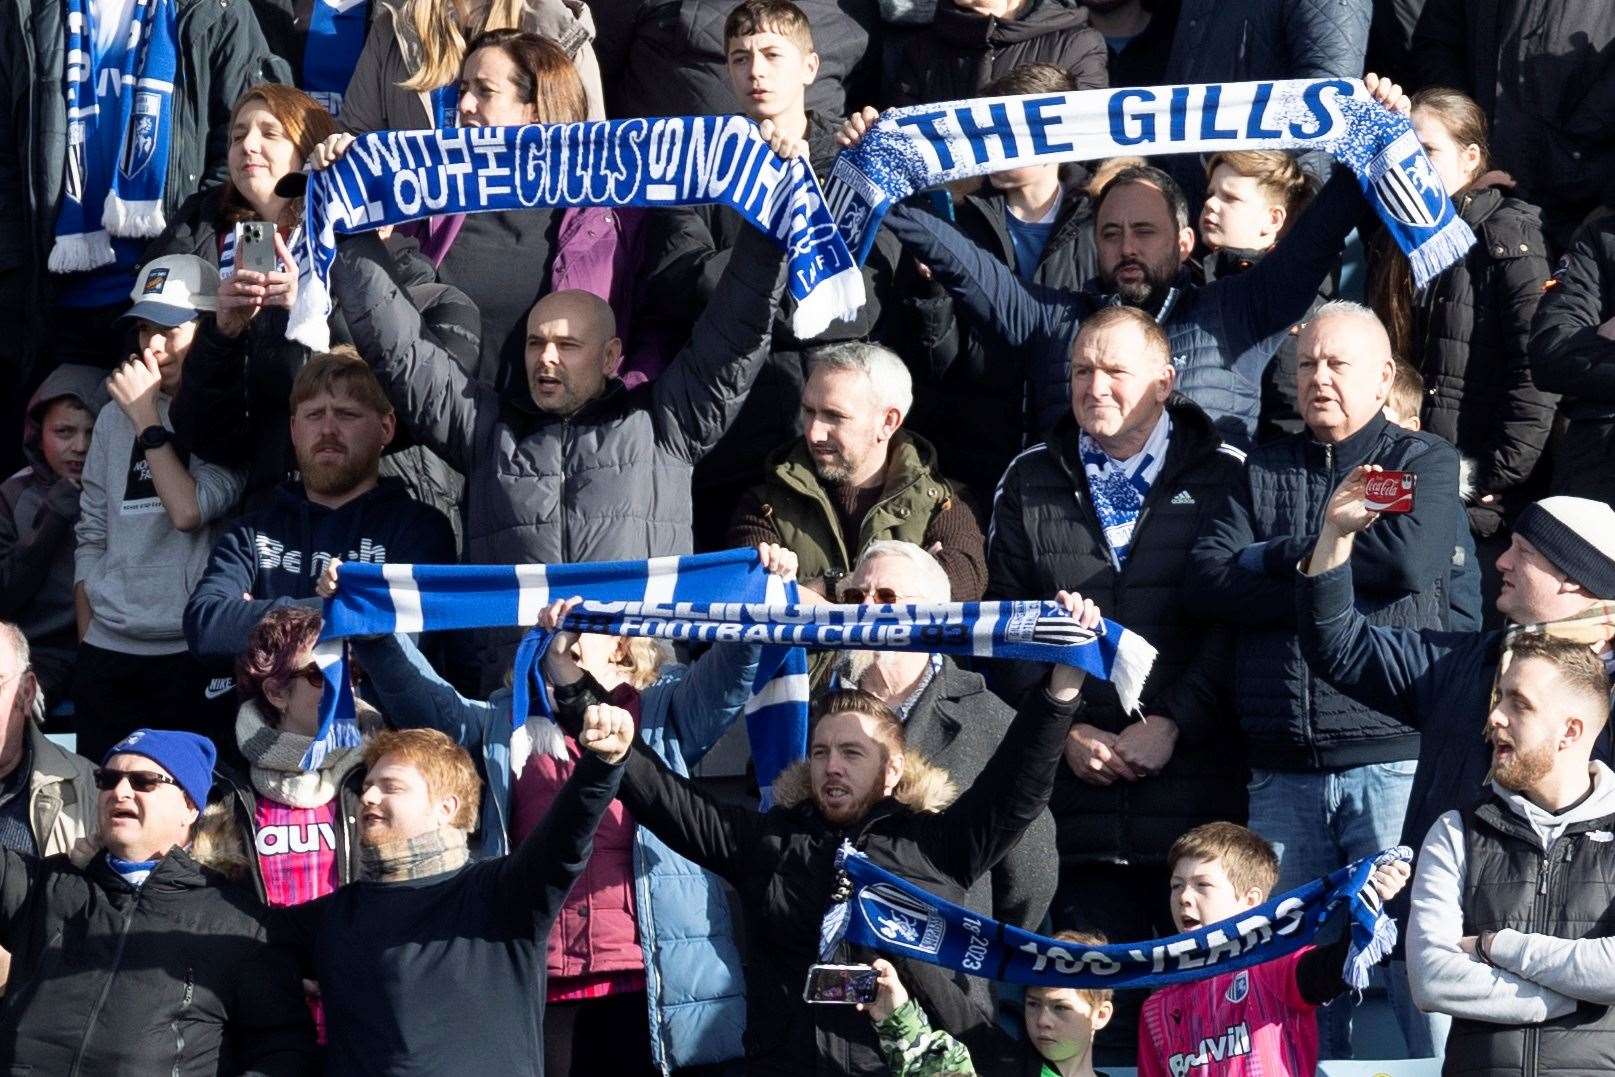 Gillingham sold over 3,000 season tickets for the current campaign and the home ends were sold out on Saturday Picture: @Julian_KPI